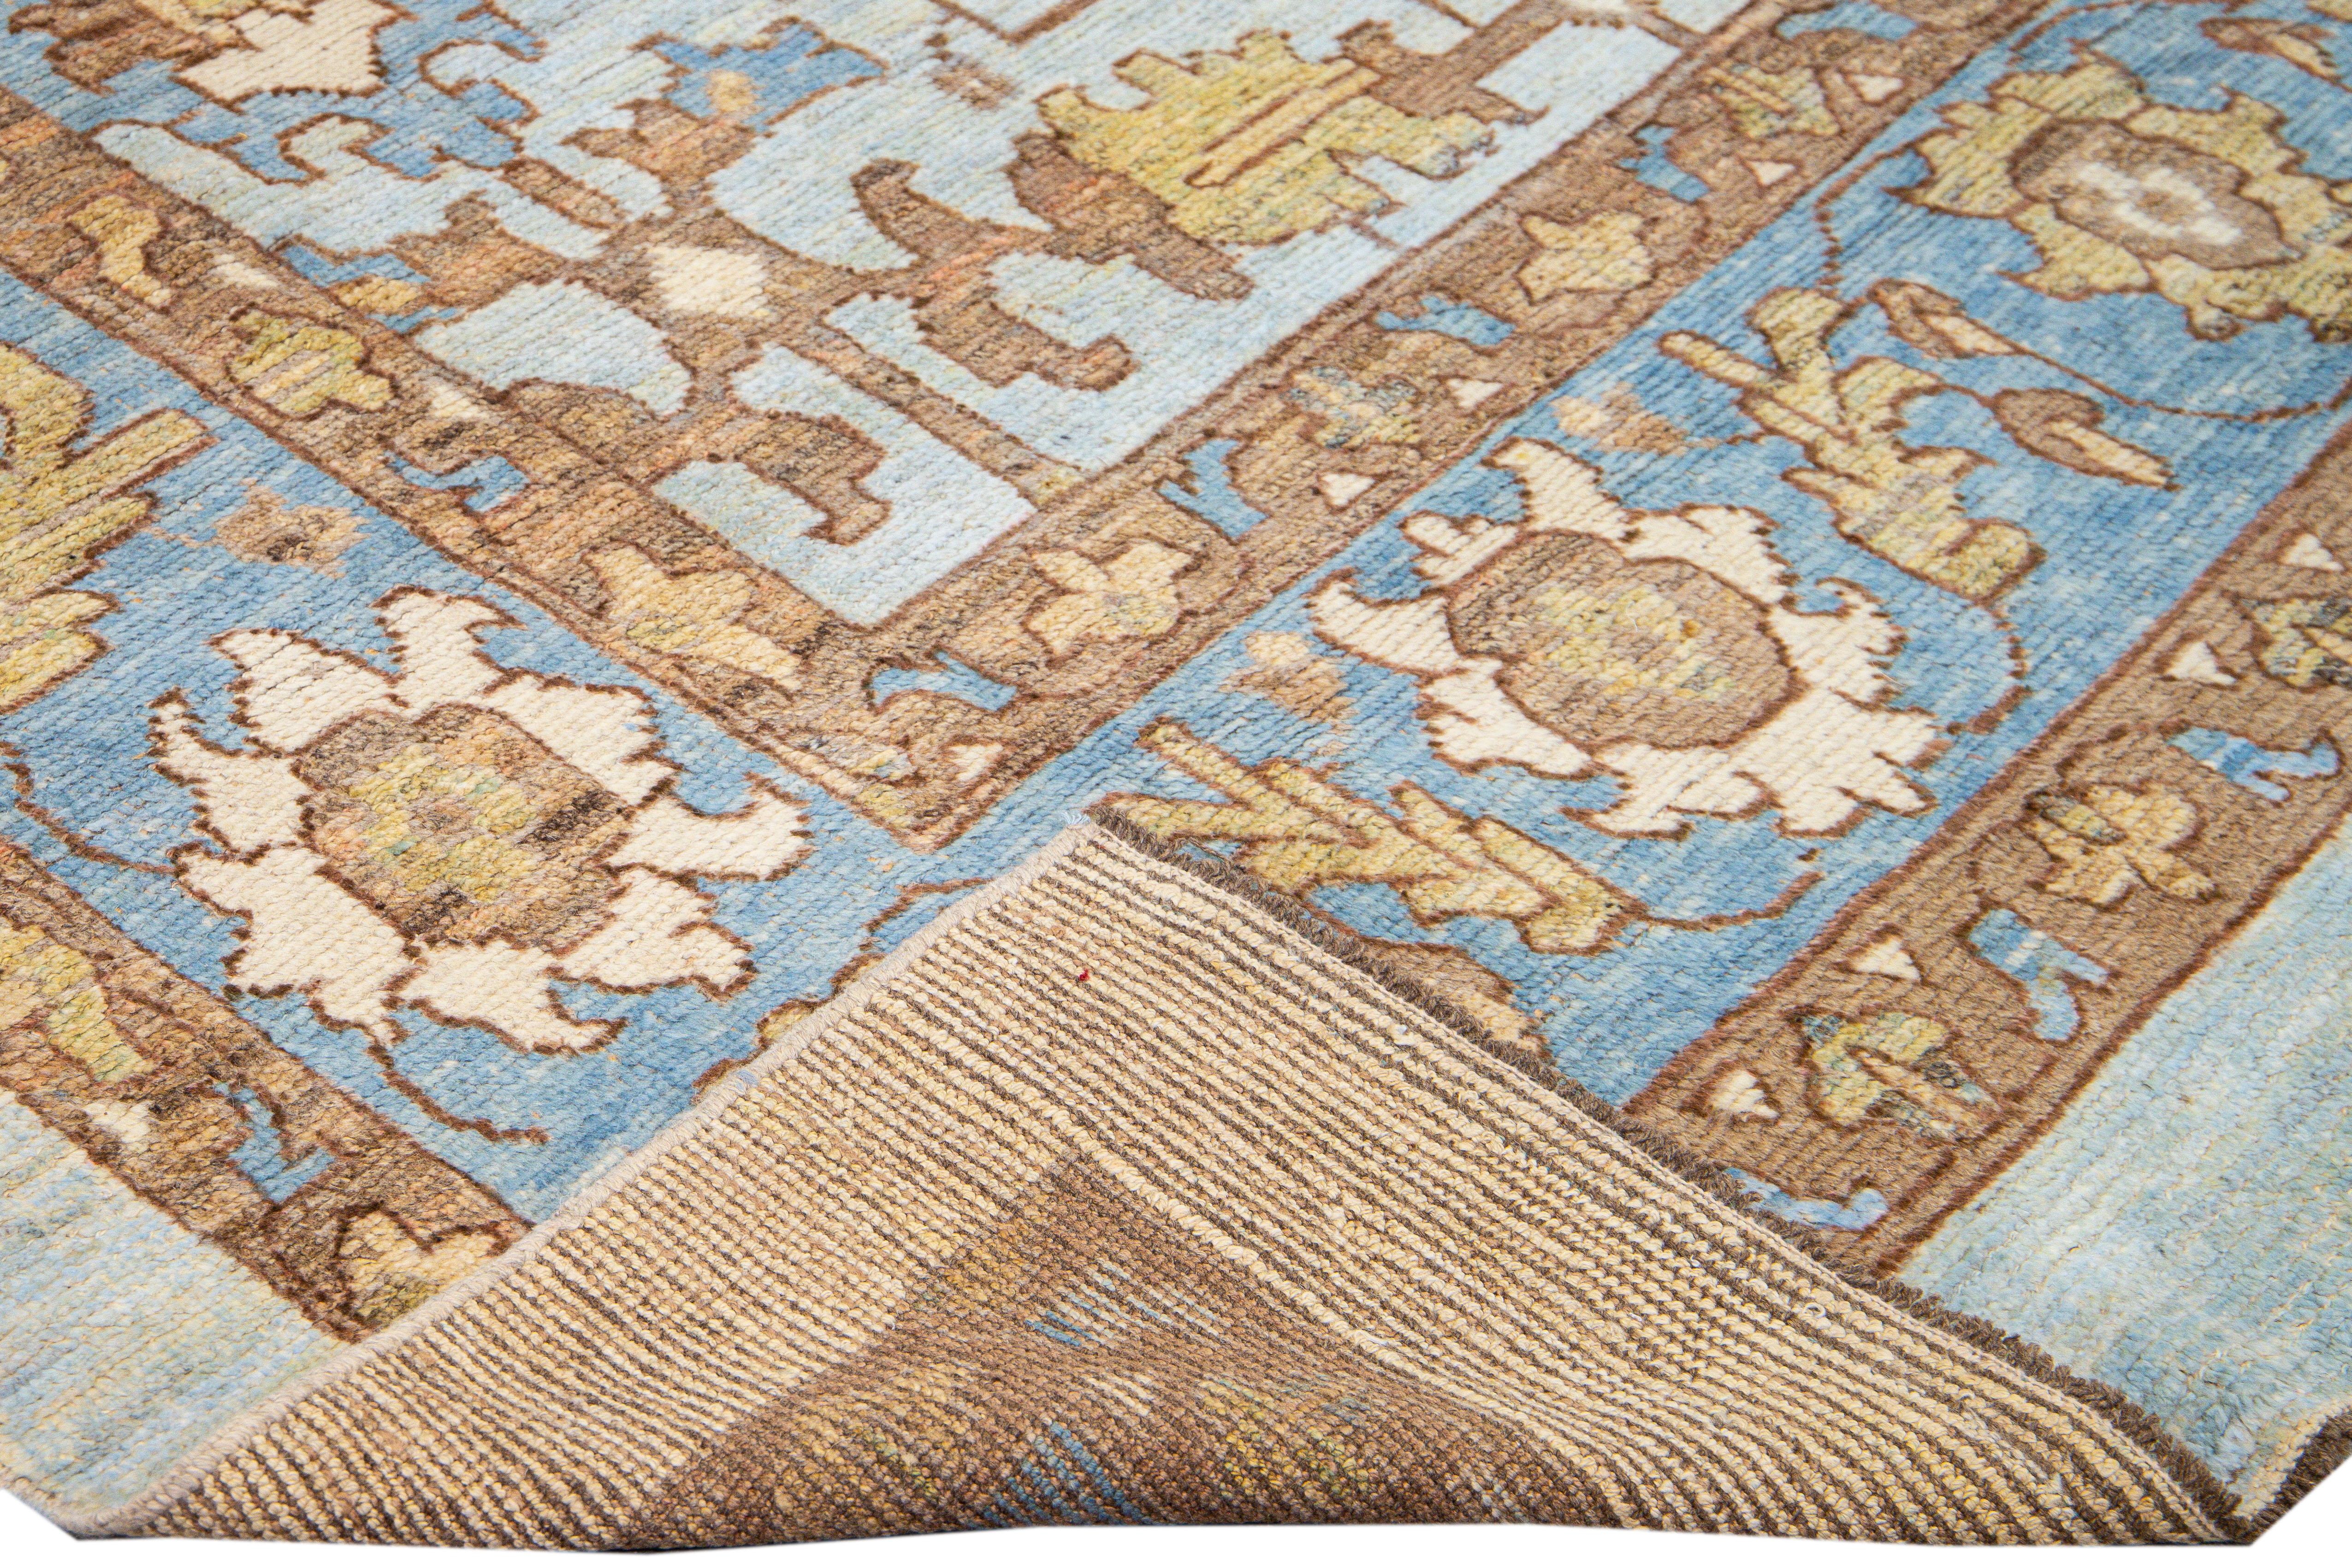 Beautiful modern Oushak hand-knotted wool rug with a blue field. This Oushak rug has goldenrod, blue, and brown accents all over a gorgeous geometric tribal floral design. 

This rug measures: 12'8